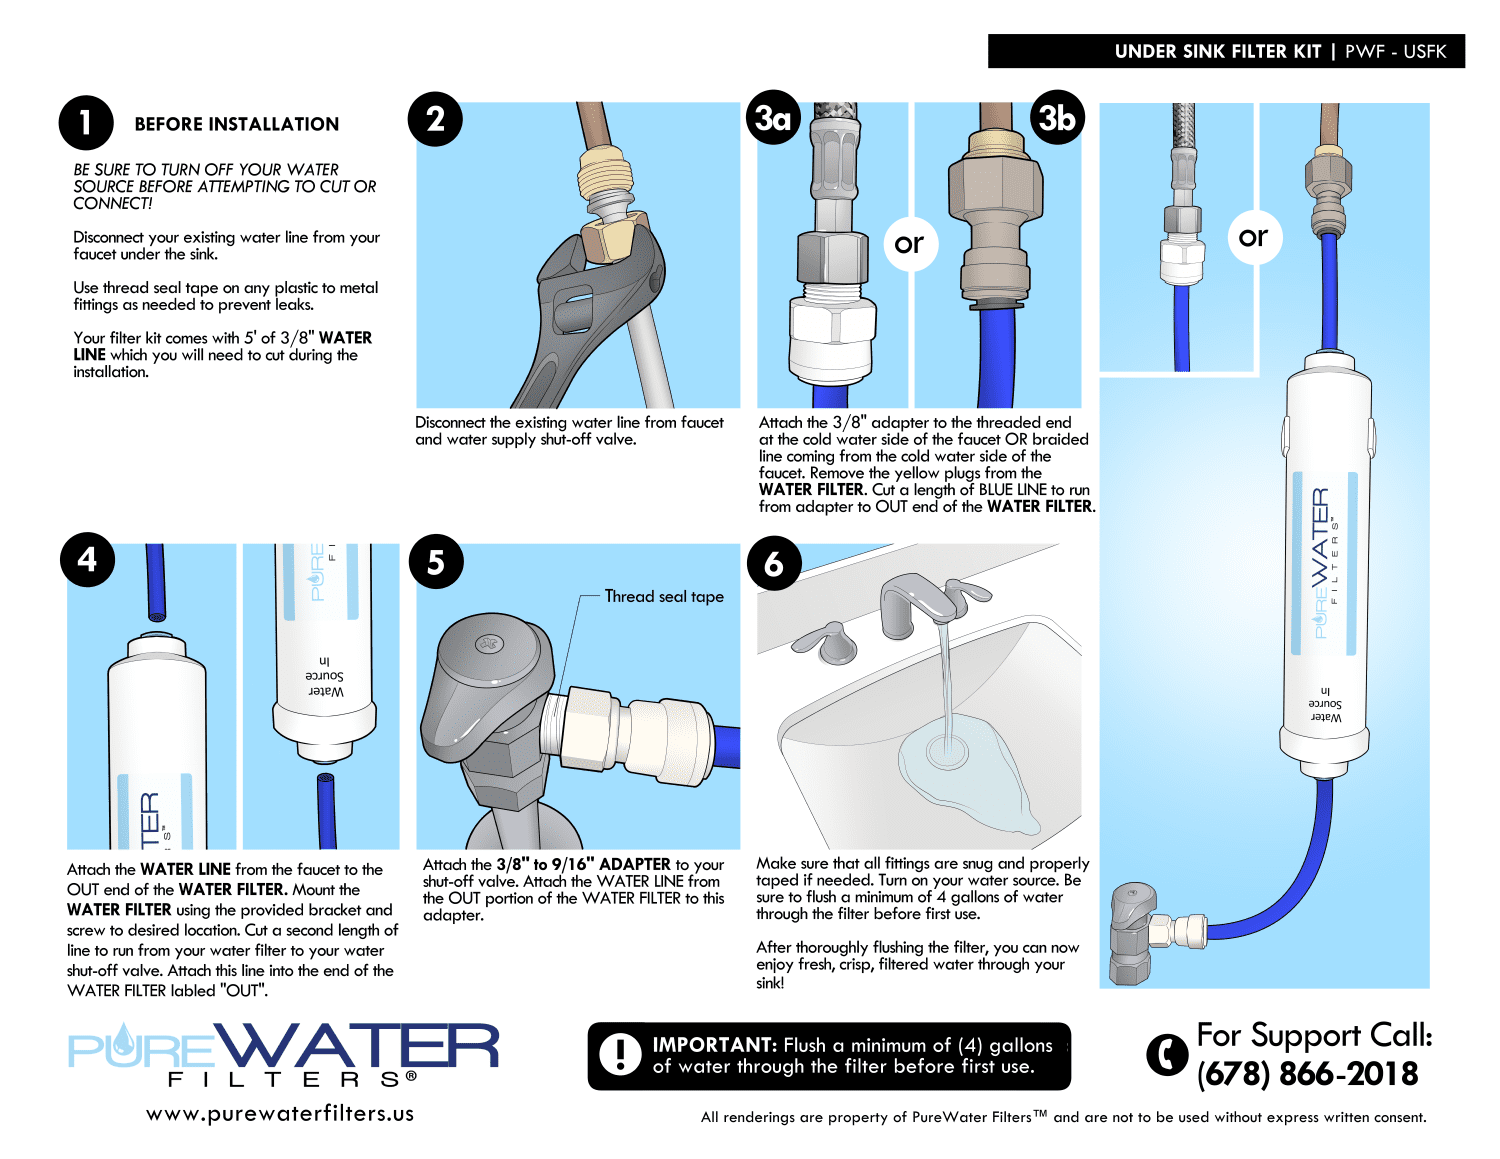 Under Sink Water Filter System Kit for Kitchen Sinks and Bathroom Faucets Installation Instructions for PureWater Filters PWF-USFK